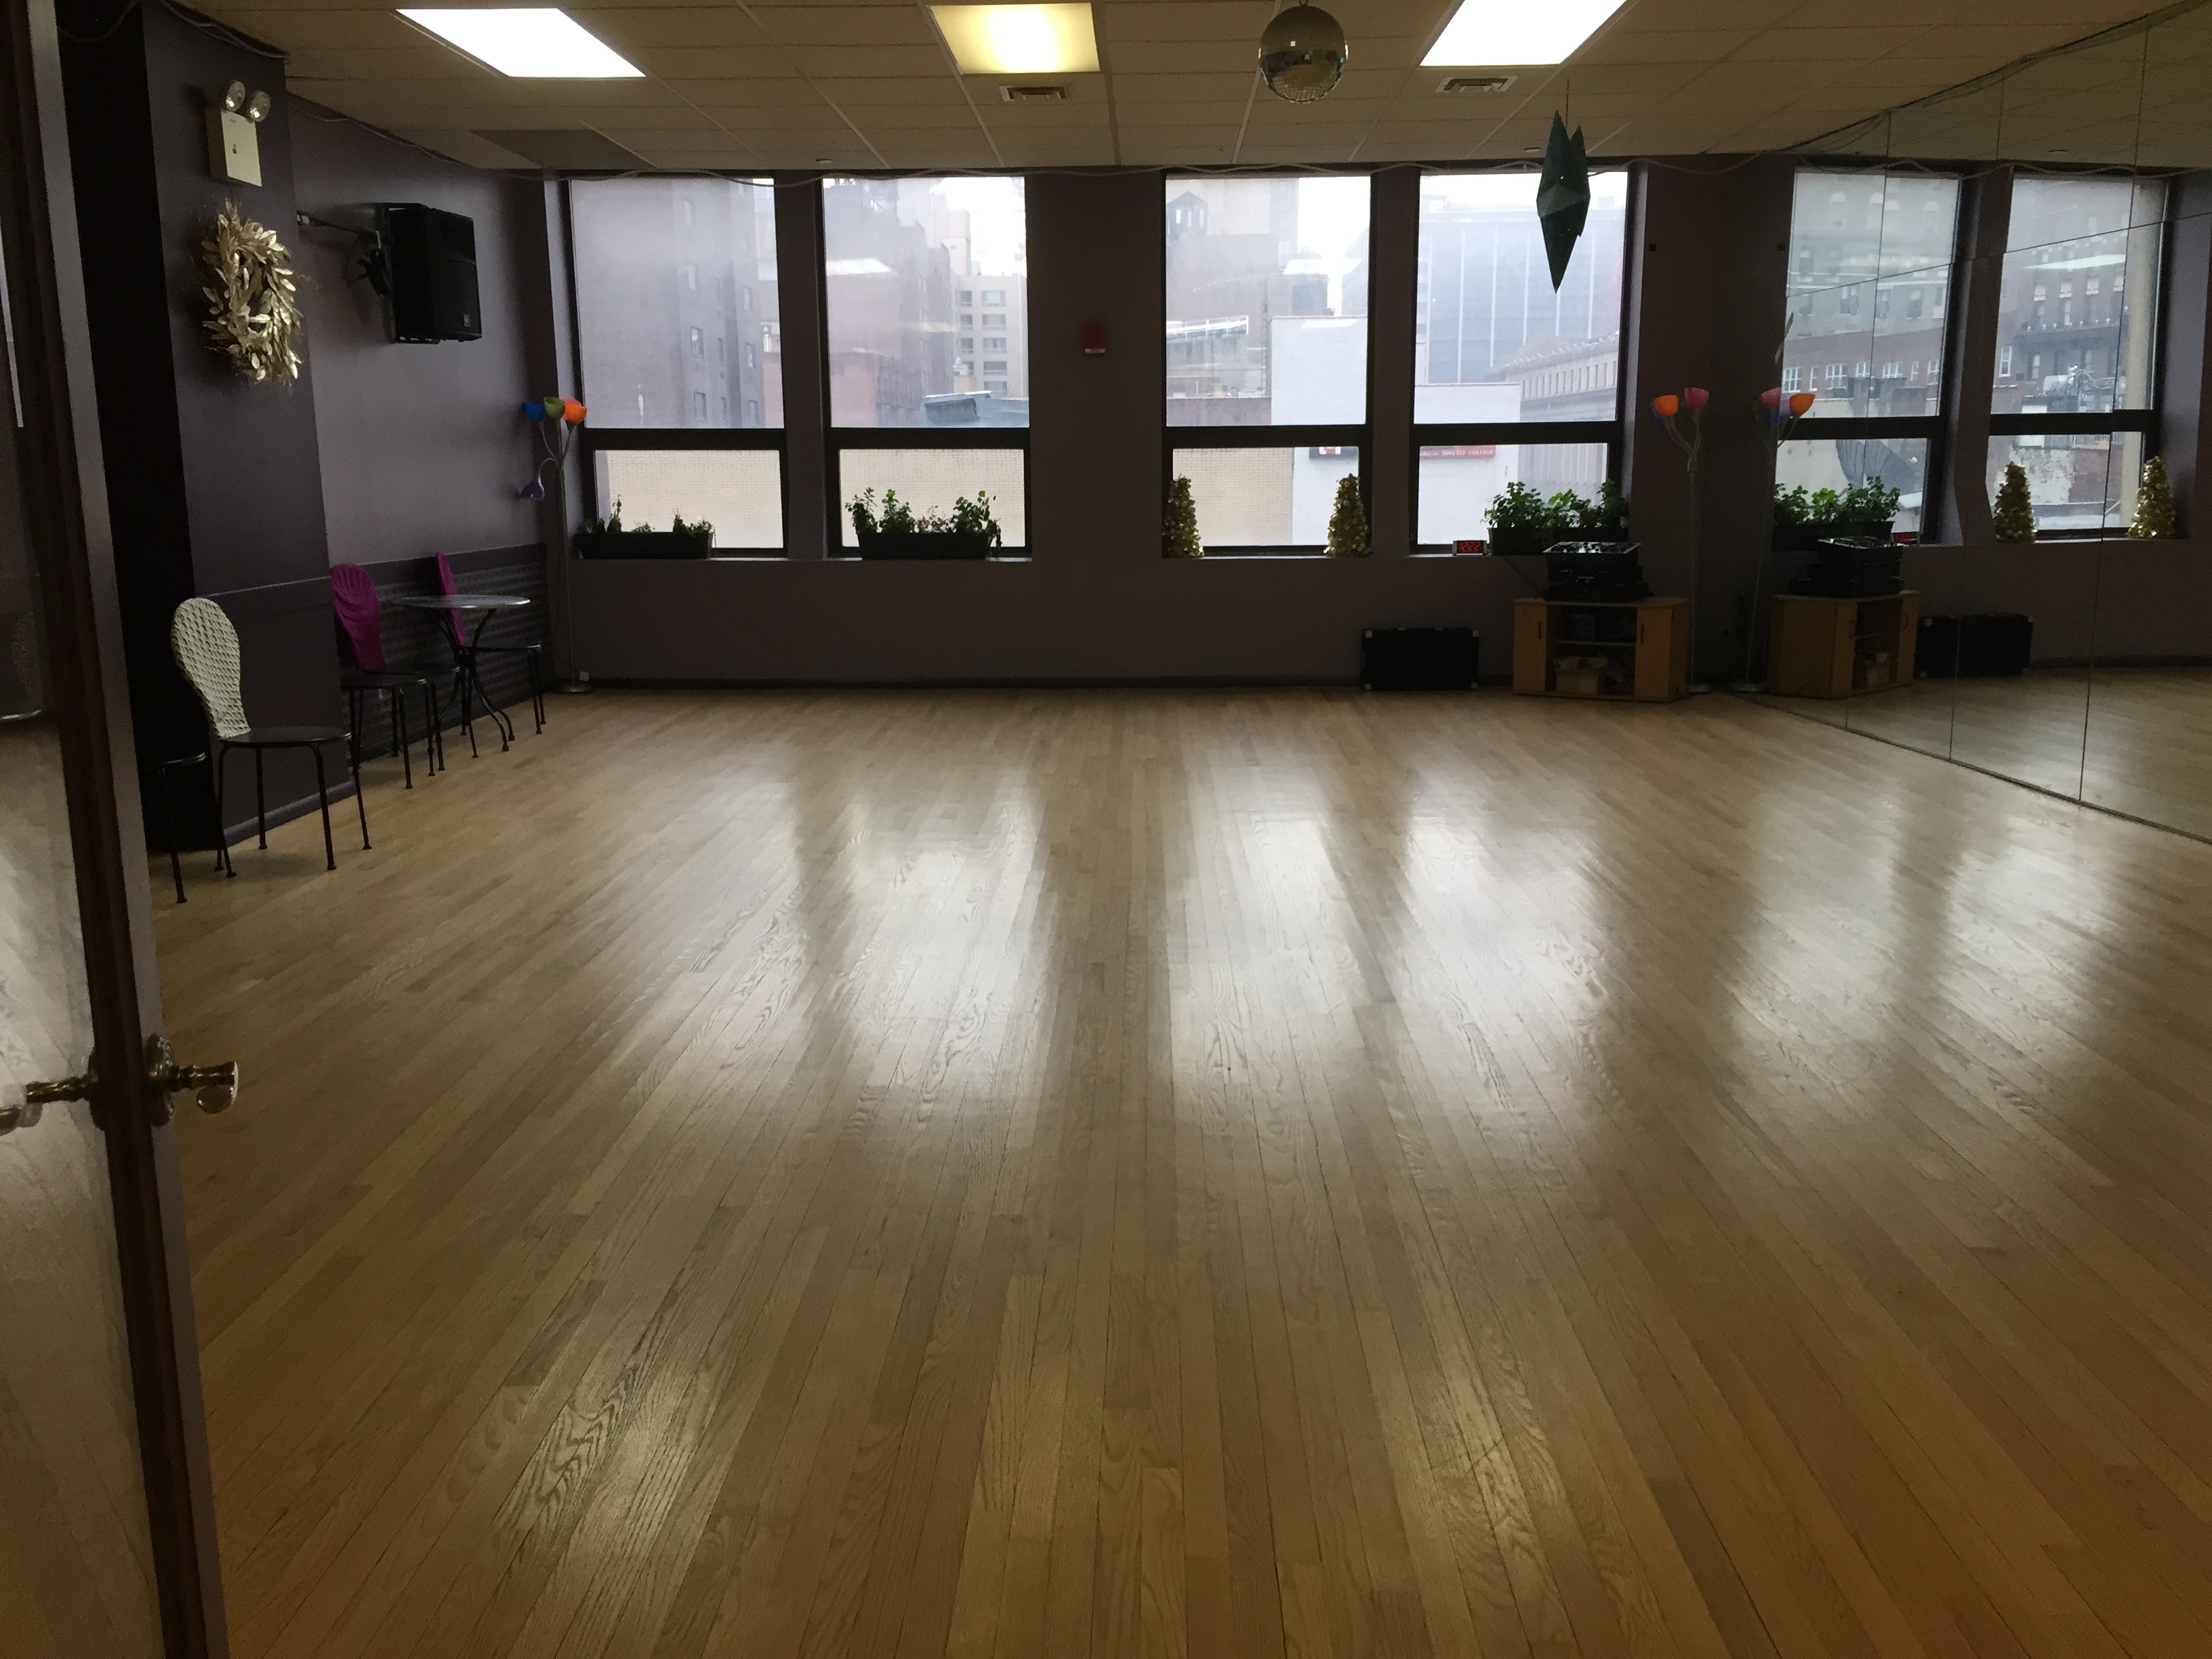 Rehearsal Space Rental NYC, available for Audition Space Rental, NYC Rehearsal Space, Audition Space NYC & Photo Shoot Space NYC. Located in mid-town. Dance Manhattan at You Should Be Dancing...!